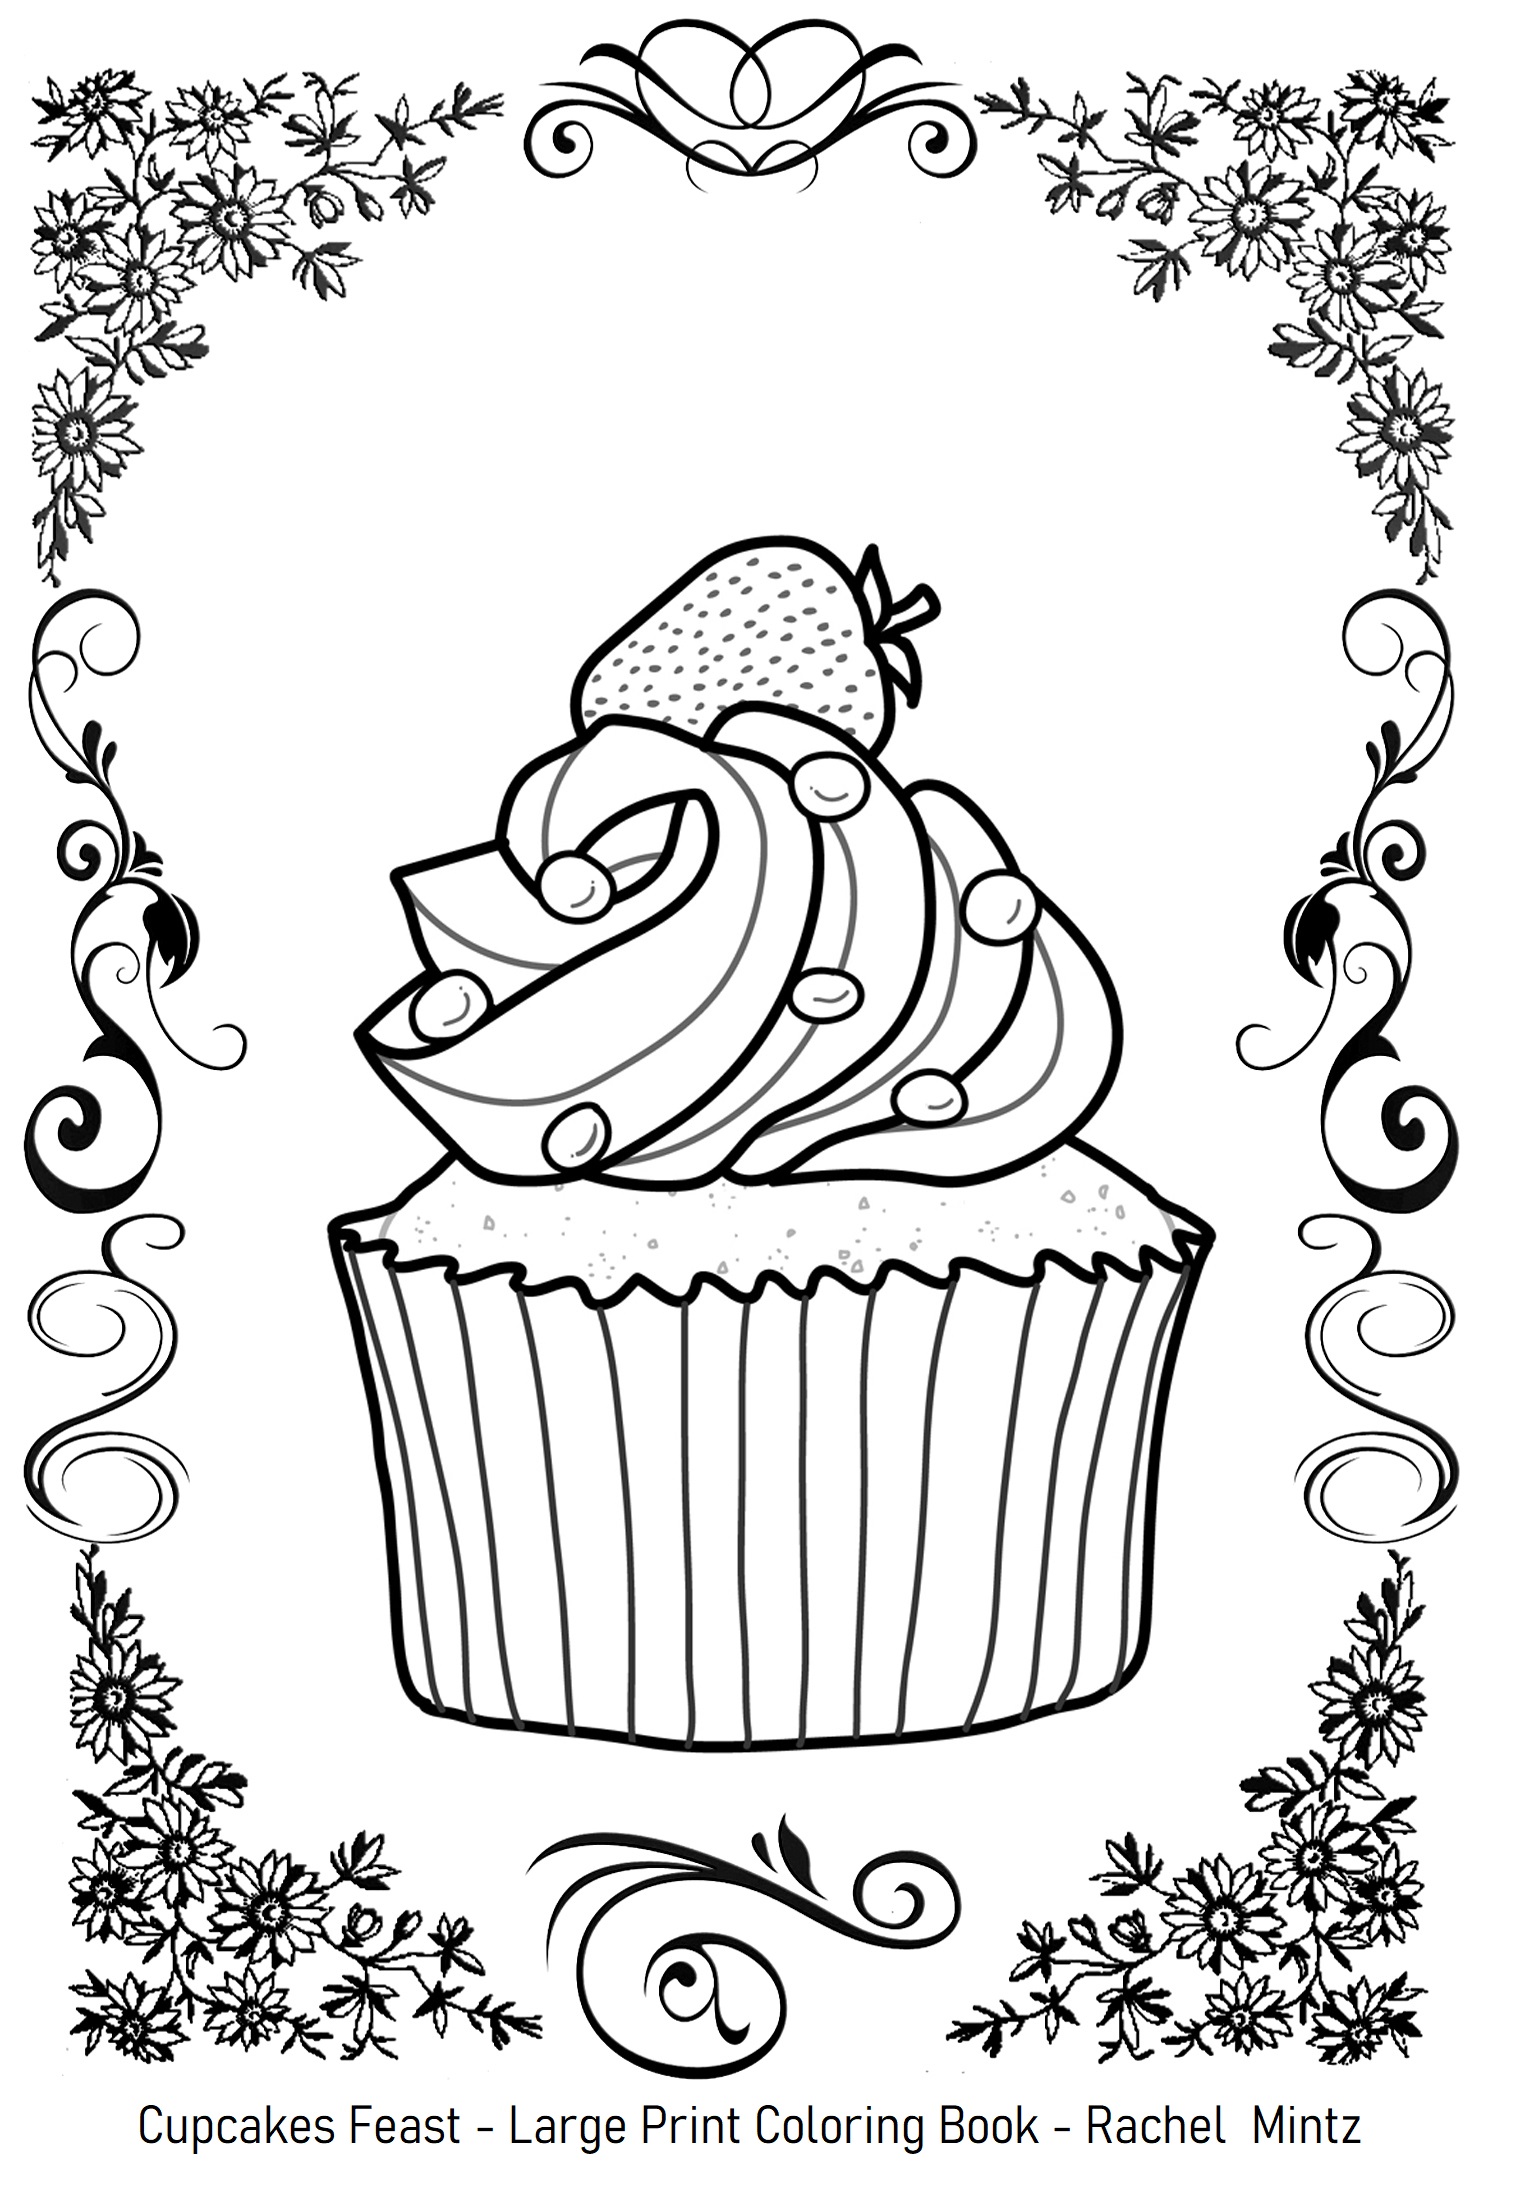 Cupcakes Feast - Large Print, PDF Coloring Book For ...